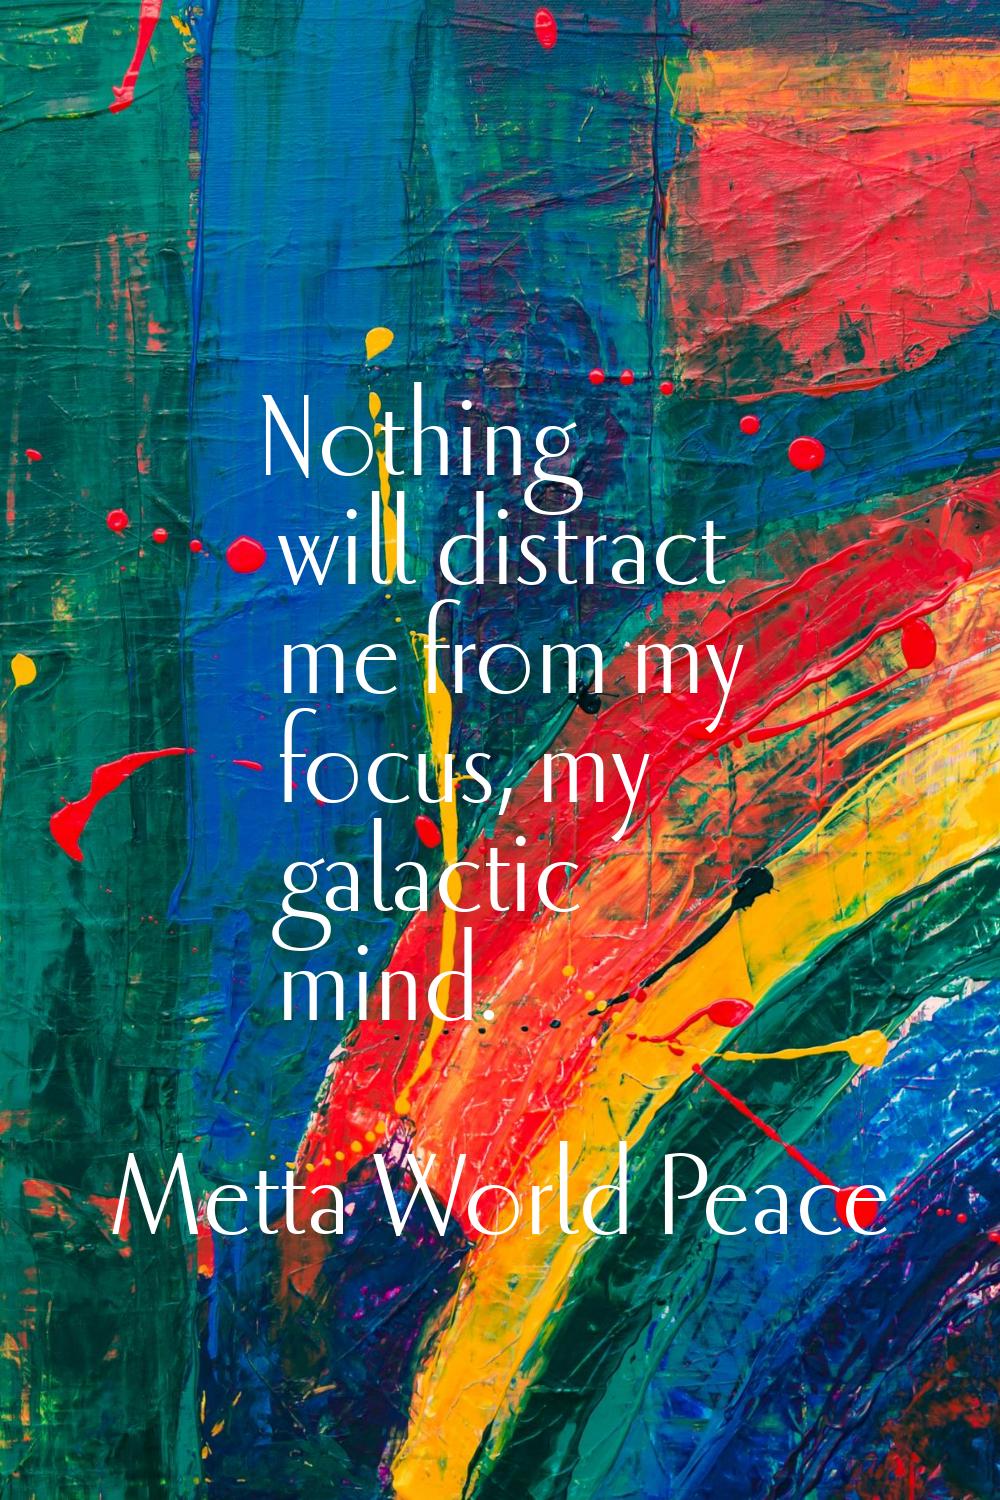 Nothing will distract me from my focus, my galactic mind.